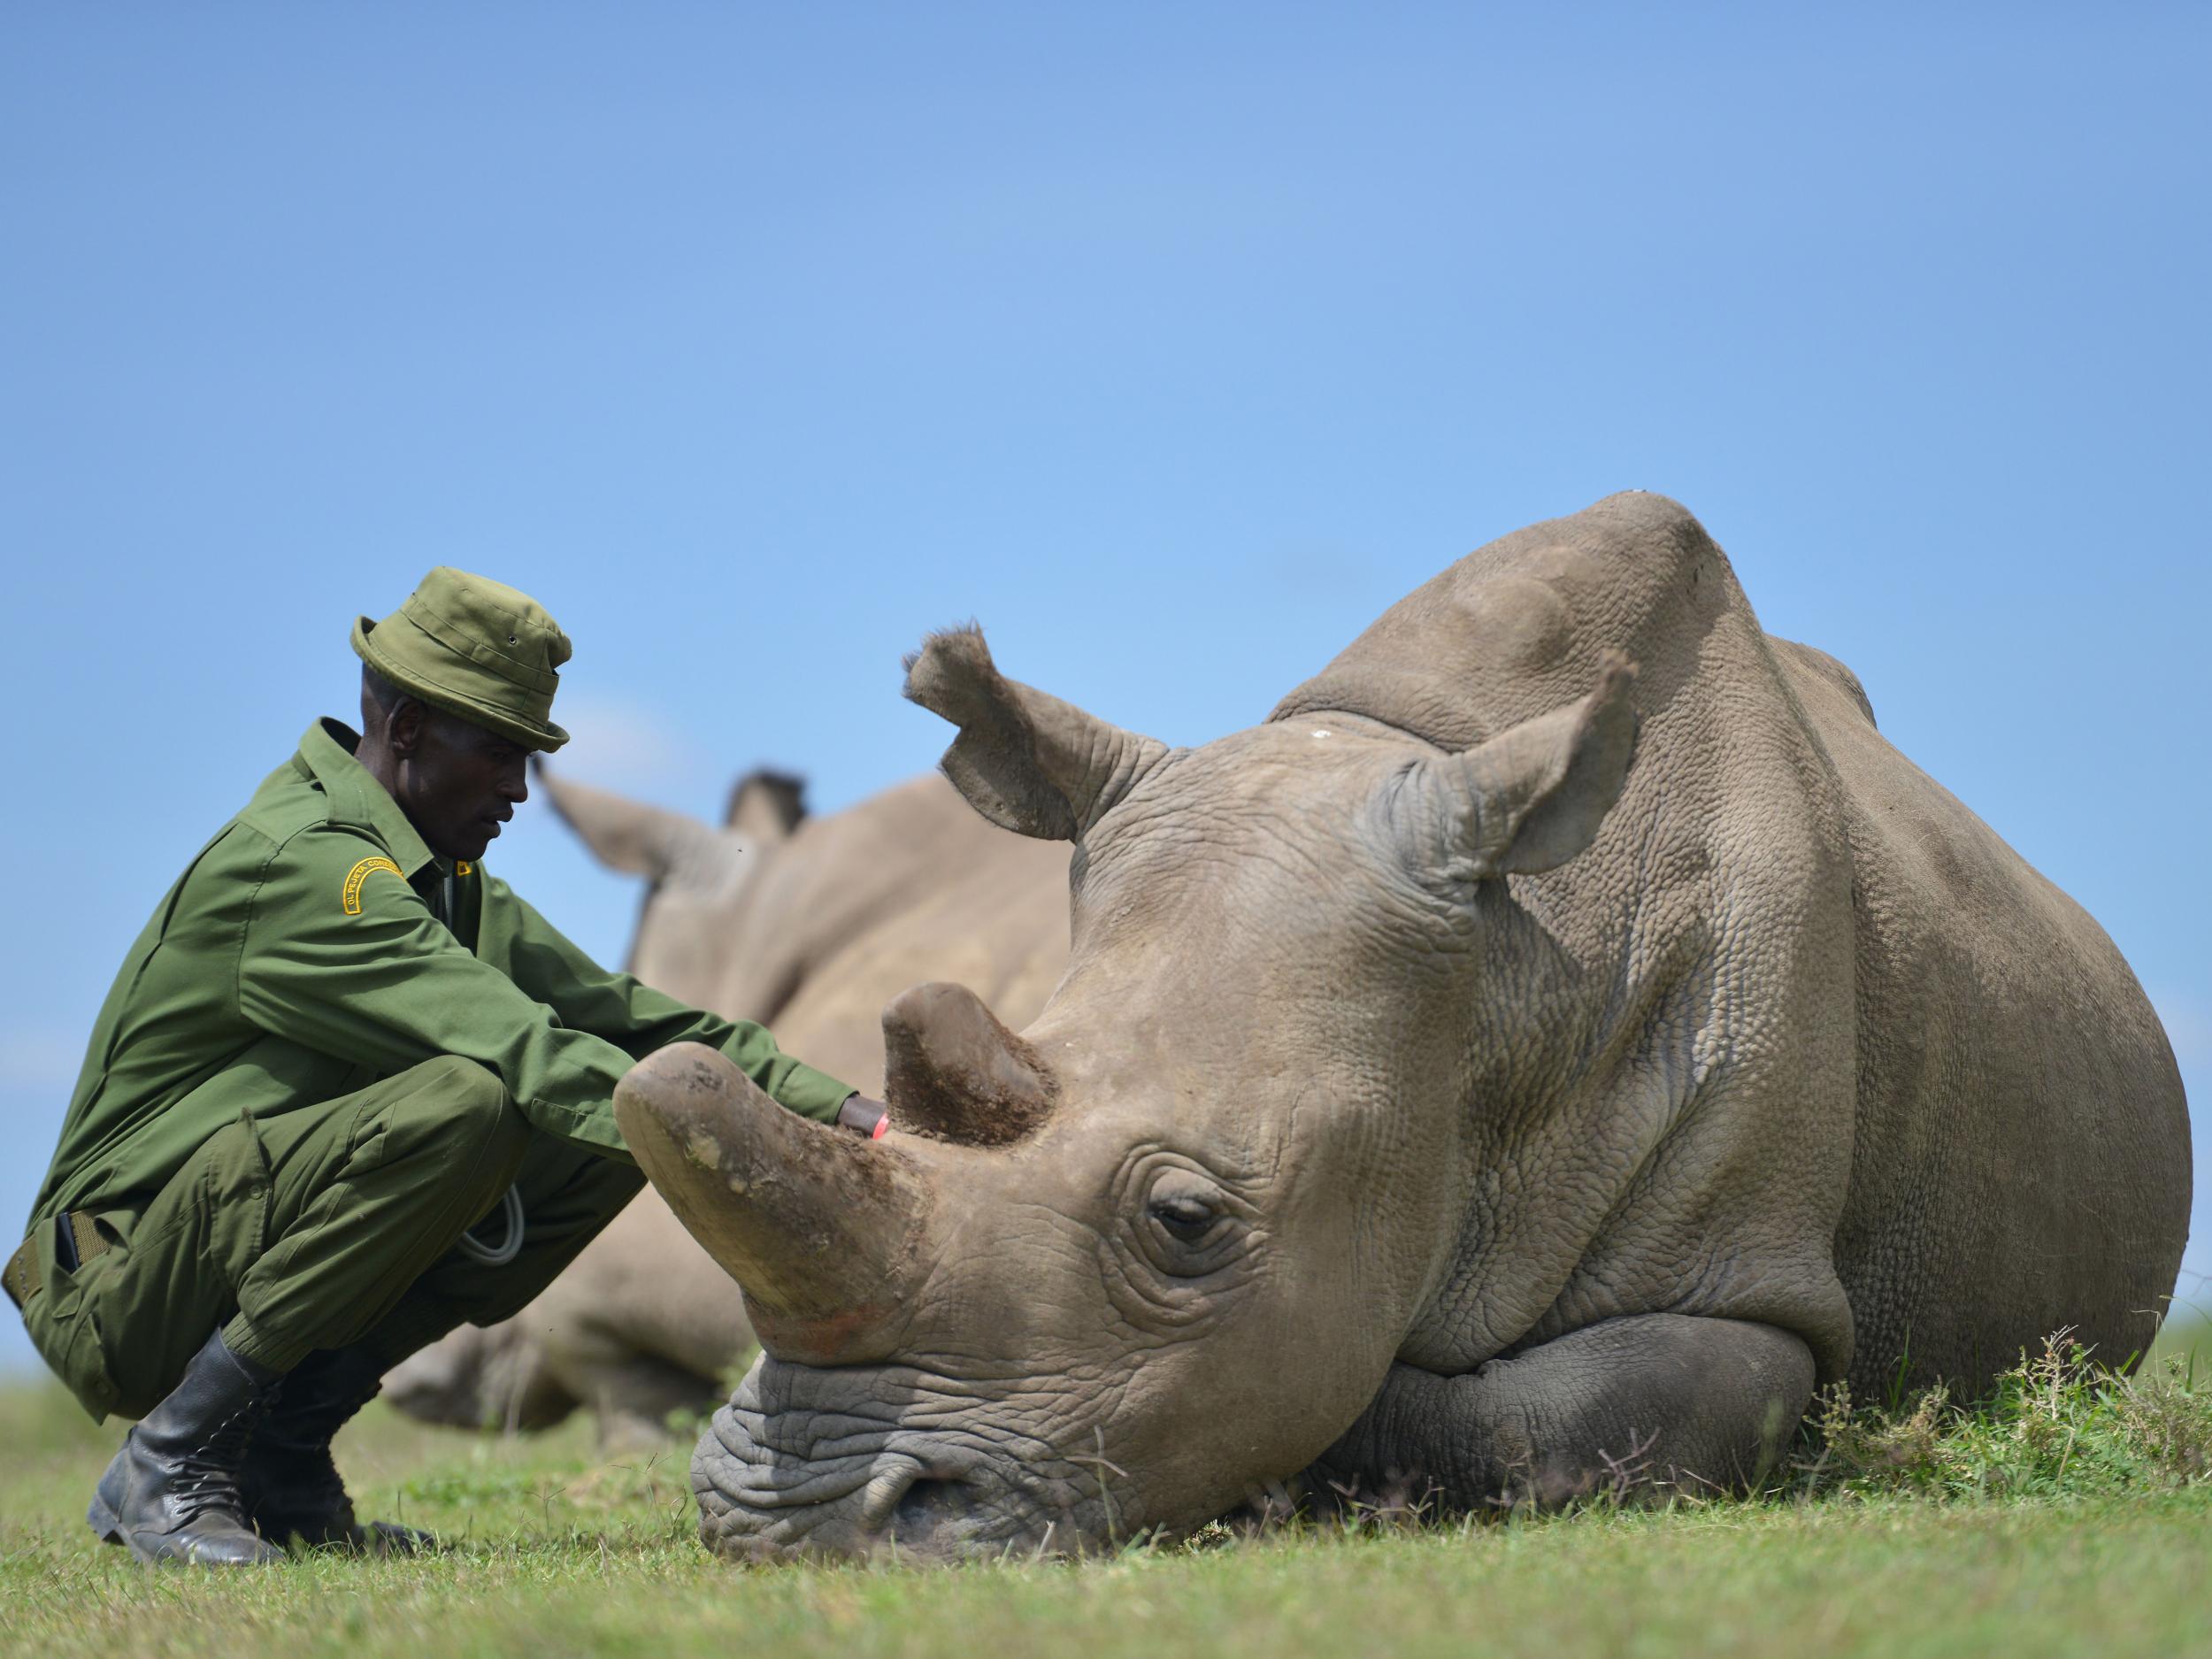 Najin, the older of only two remaining female northern white rhinos, at the Ol Pejeta conservancy in Kenya